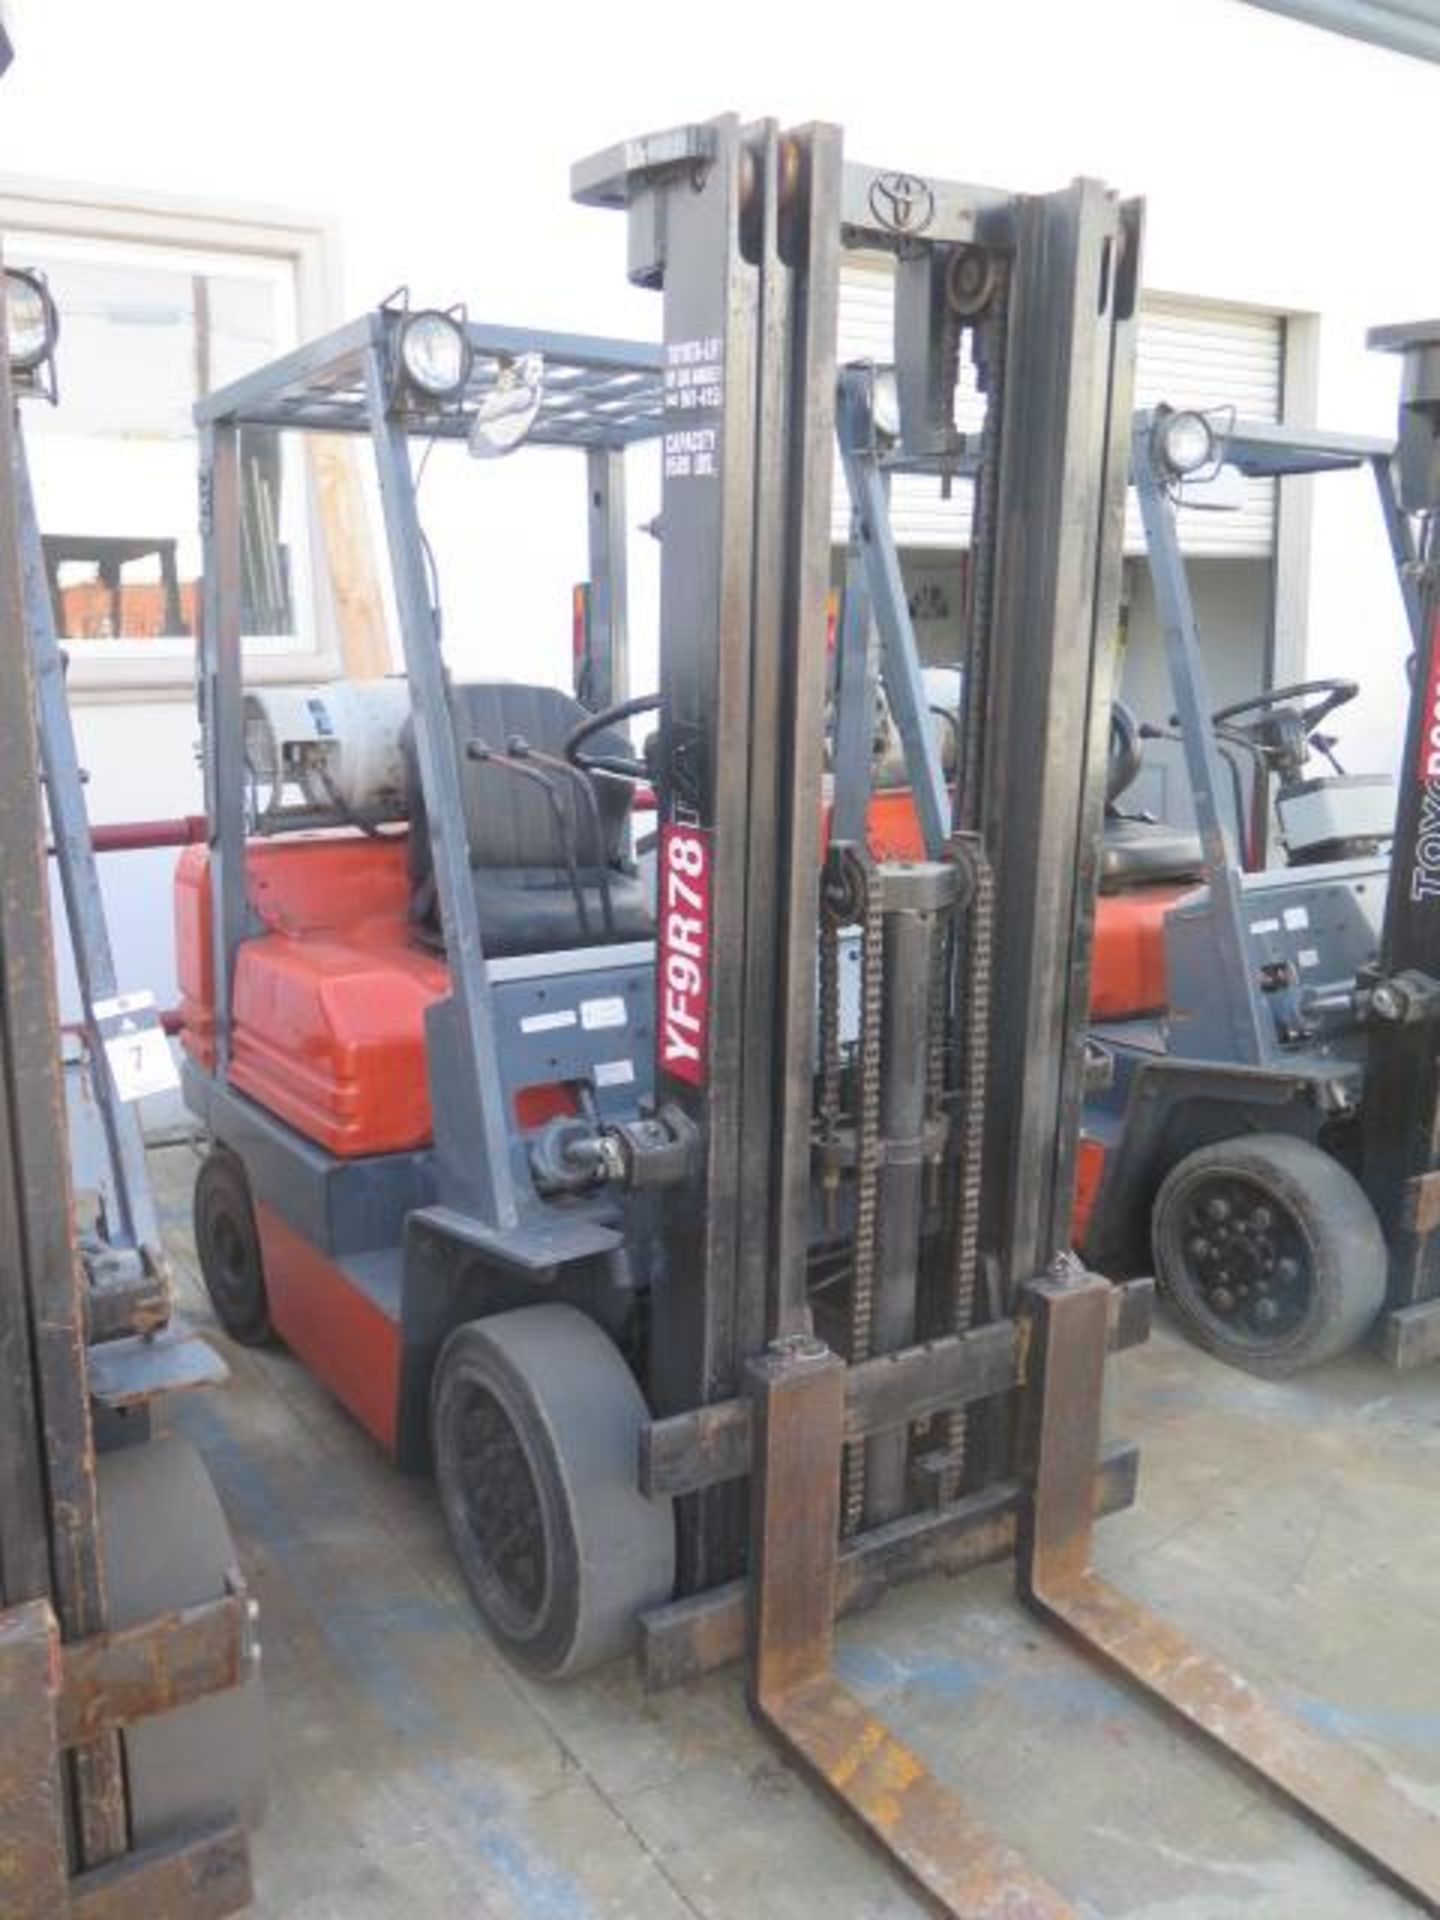 Toyota 5FGC25 5000 Lb Cap LPG Forklift s/n 85237 w/ 3-Stage Mast, 185" Lift Height, Cushion Tires, - Image 2 of 11